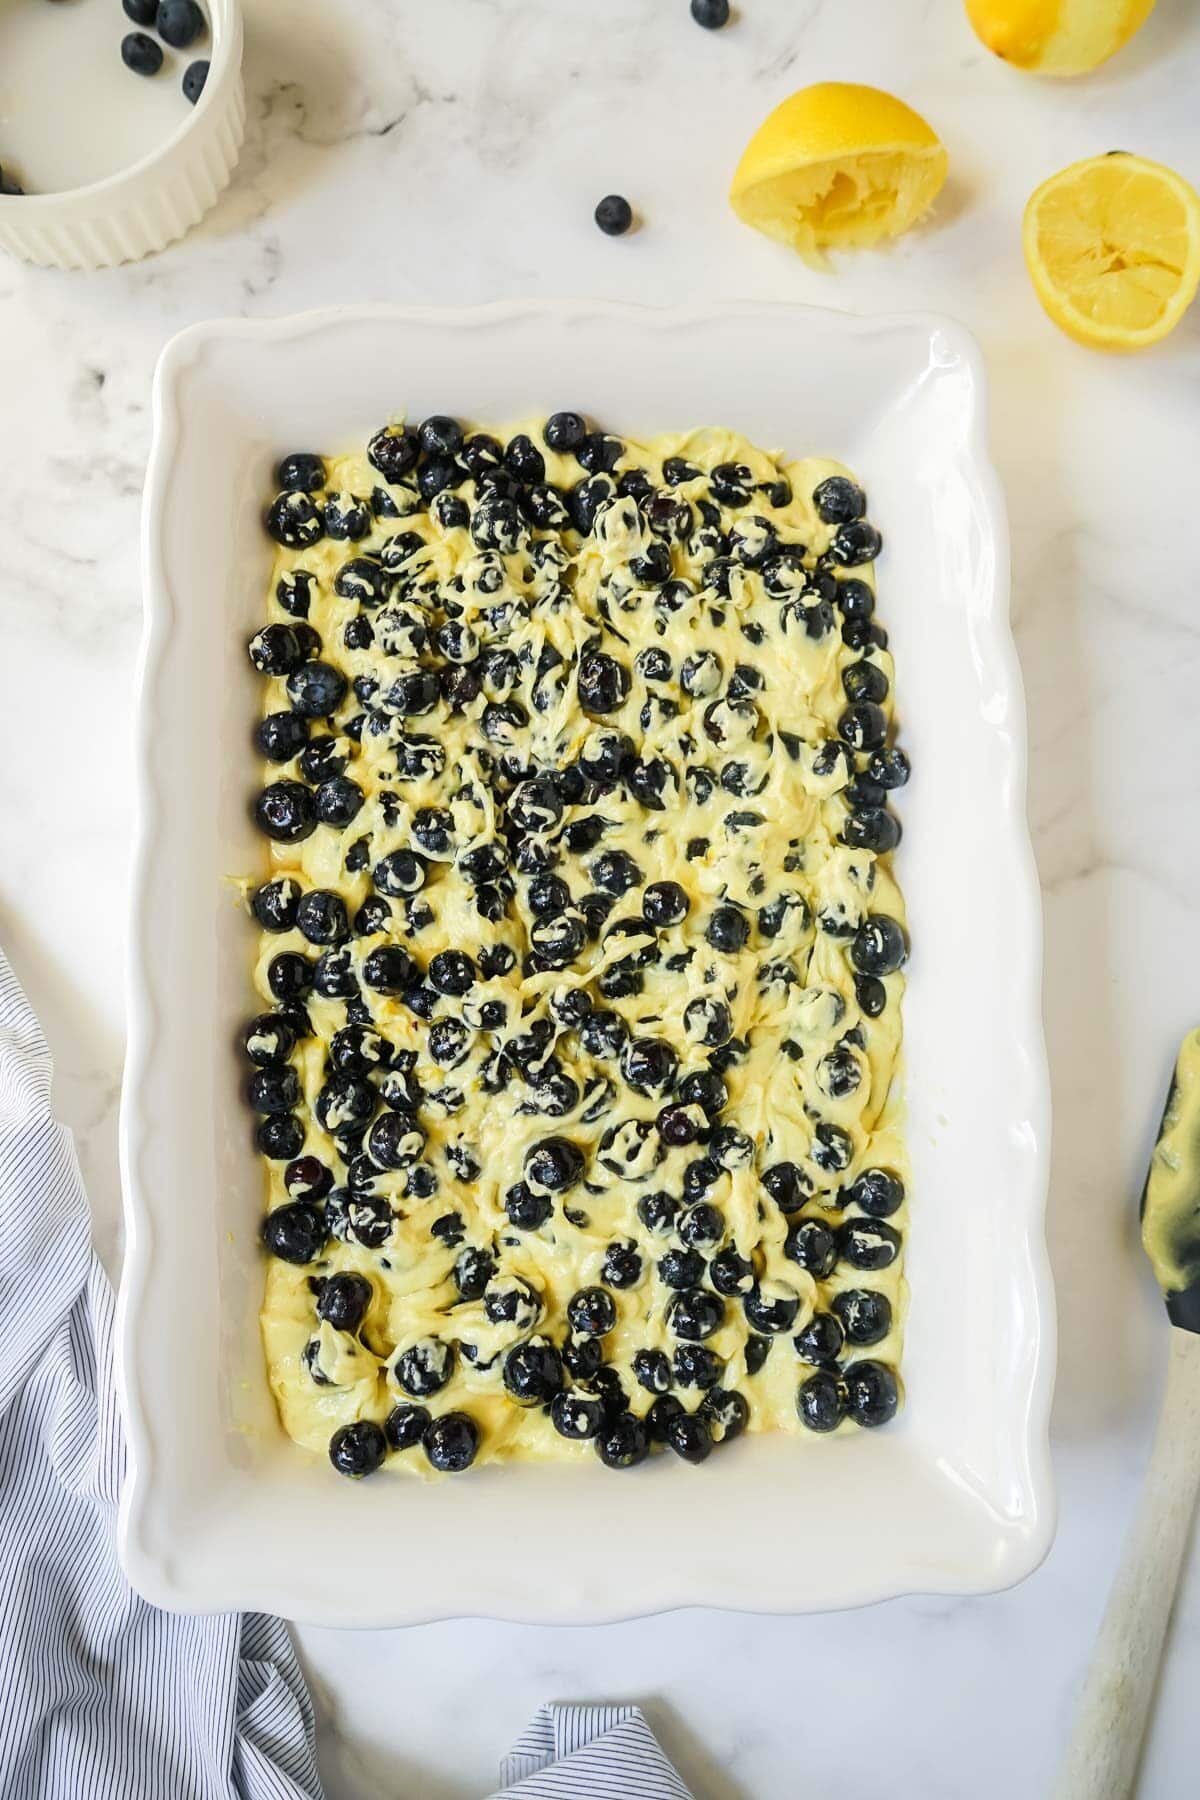 Blueberries being added to the batter in a white baking dish.